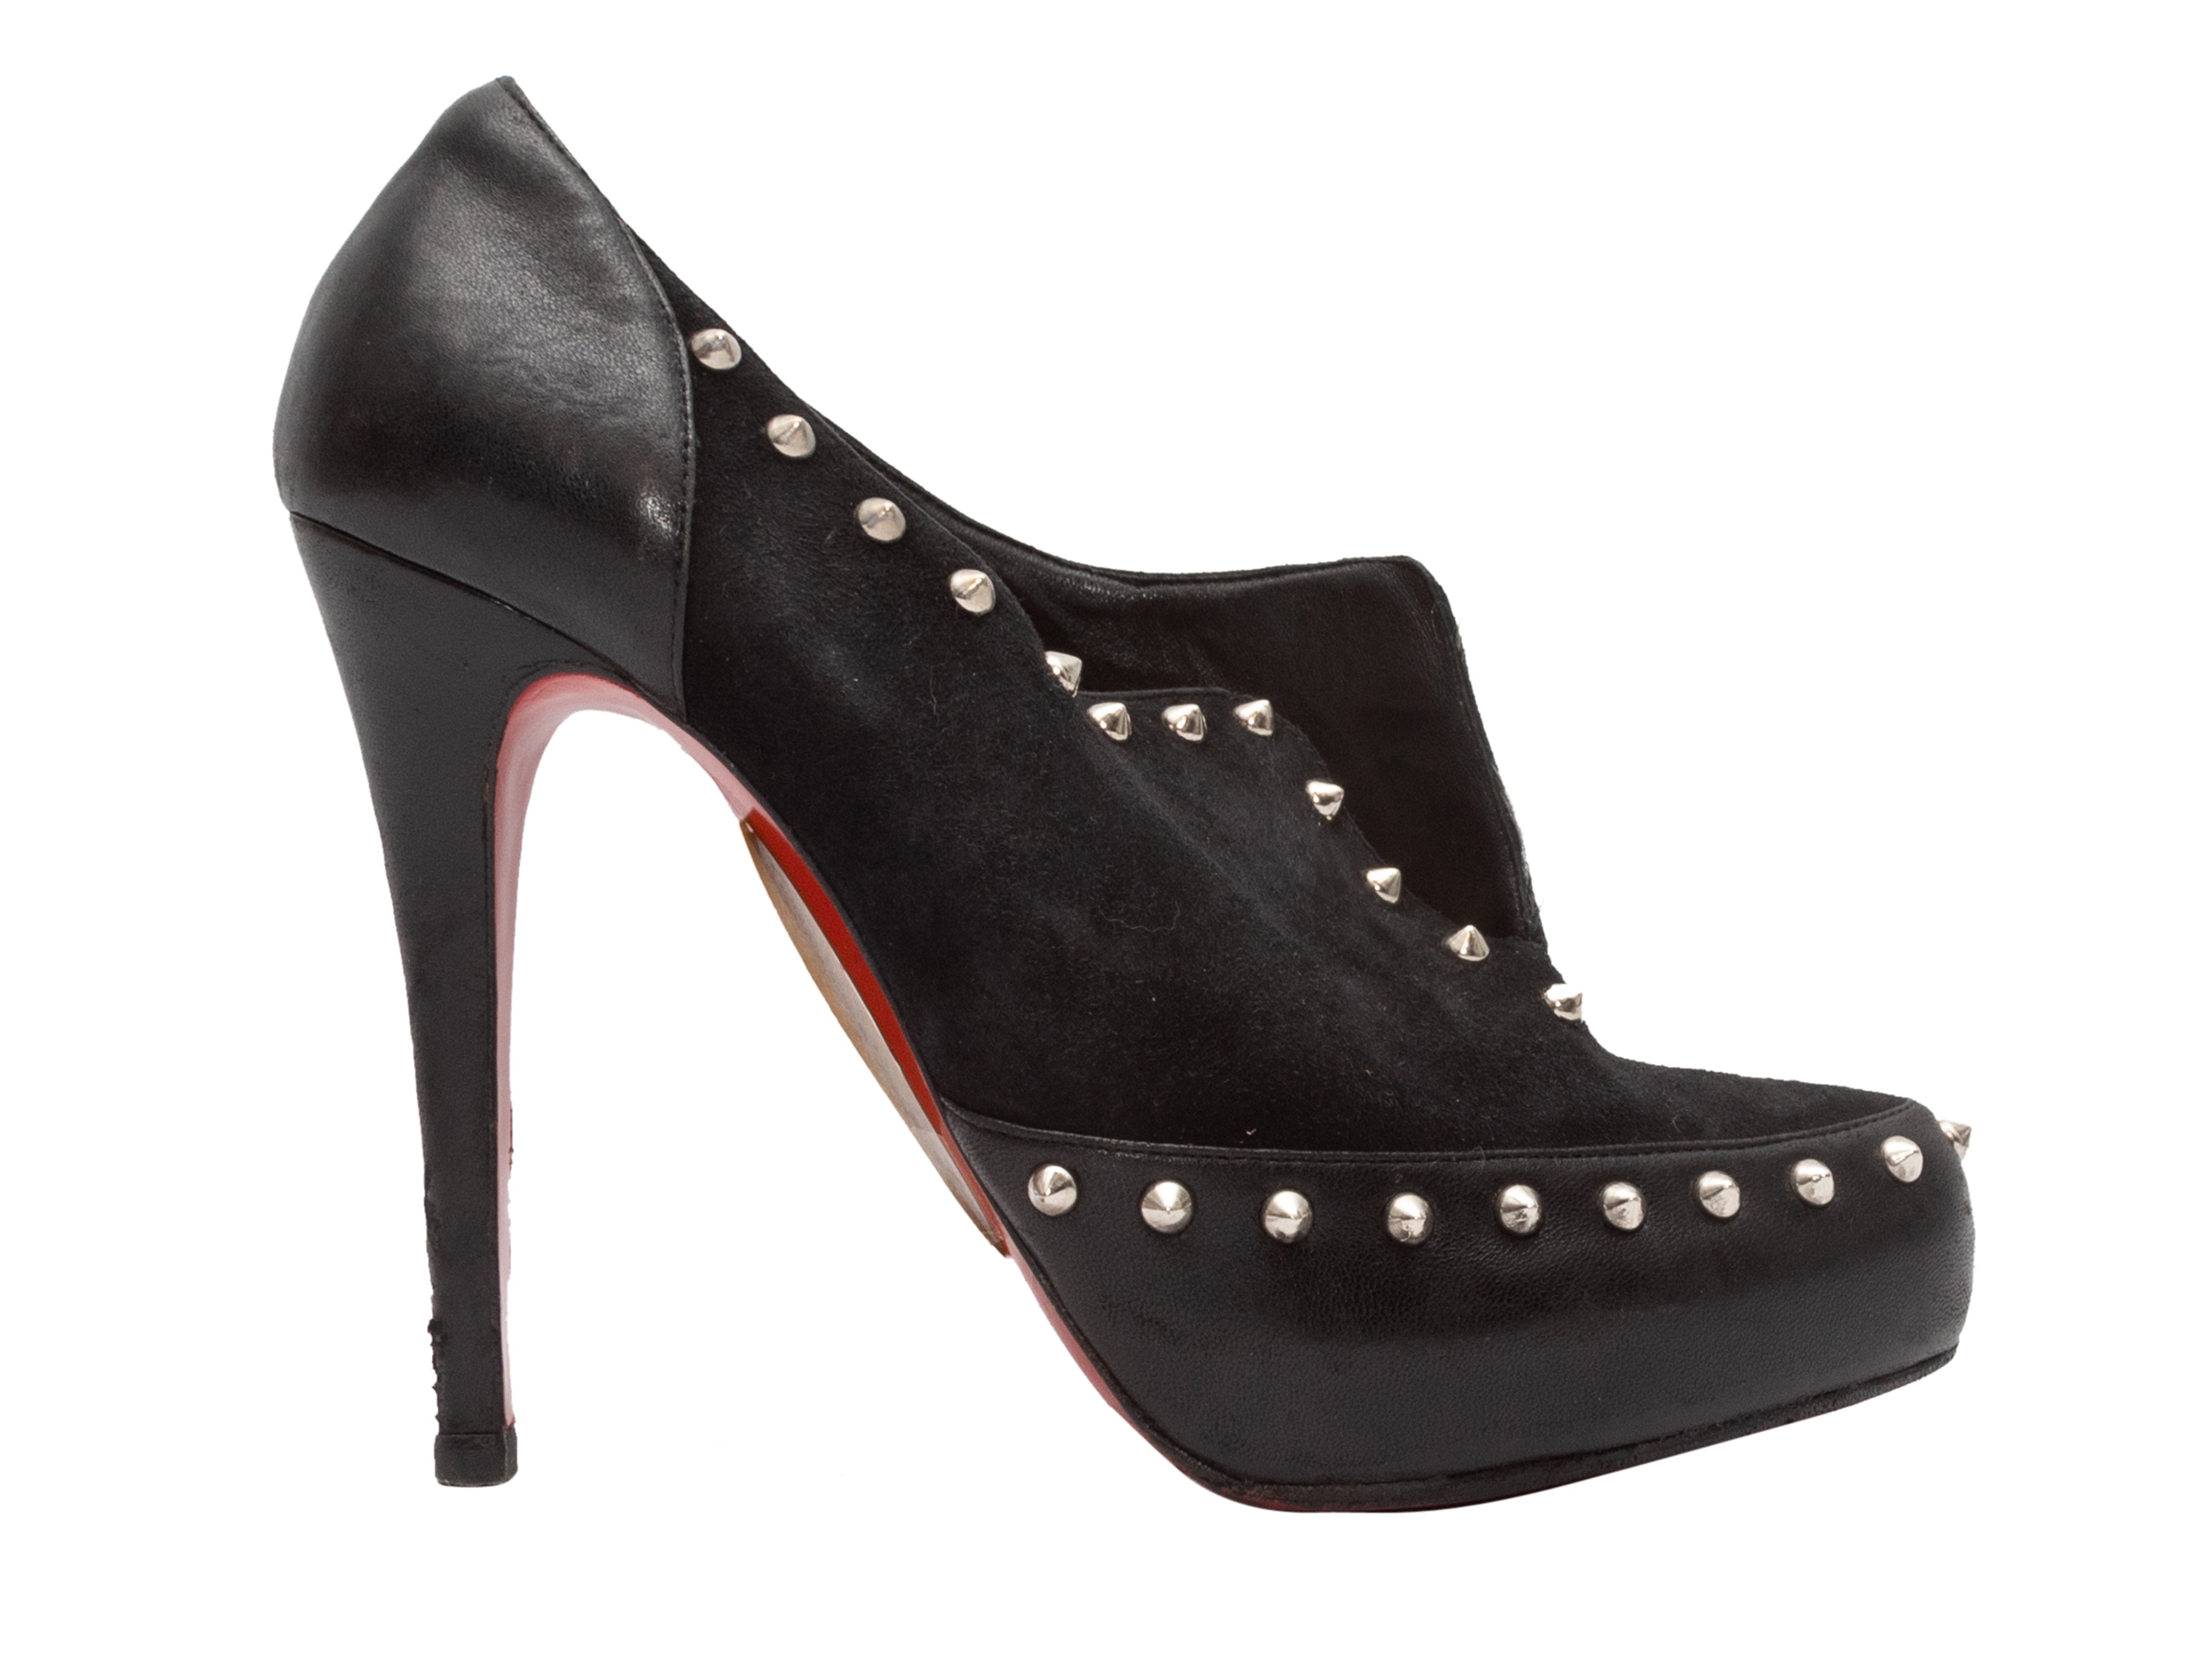 Christian Louboutin - Authenticated Boots - Leather Black Plain for Women, Good Condition